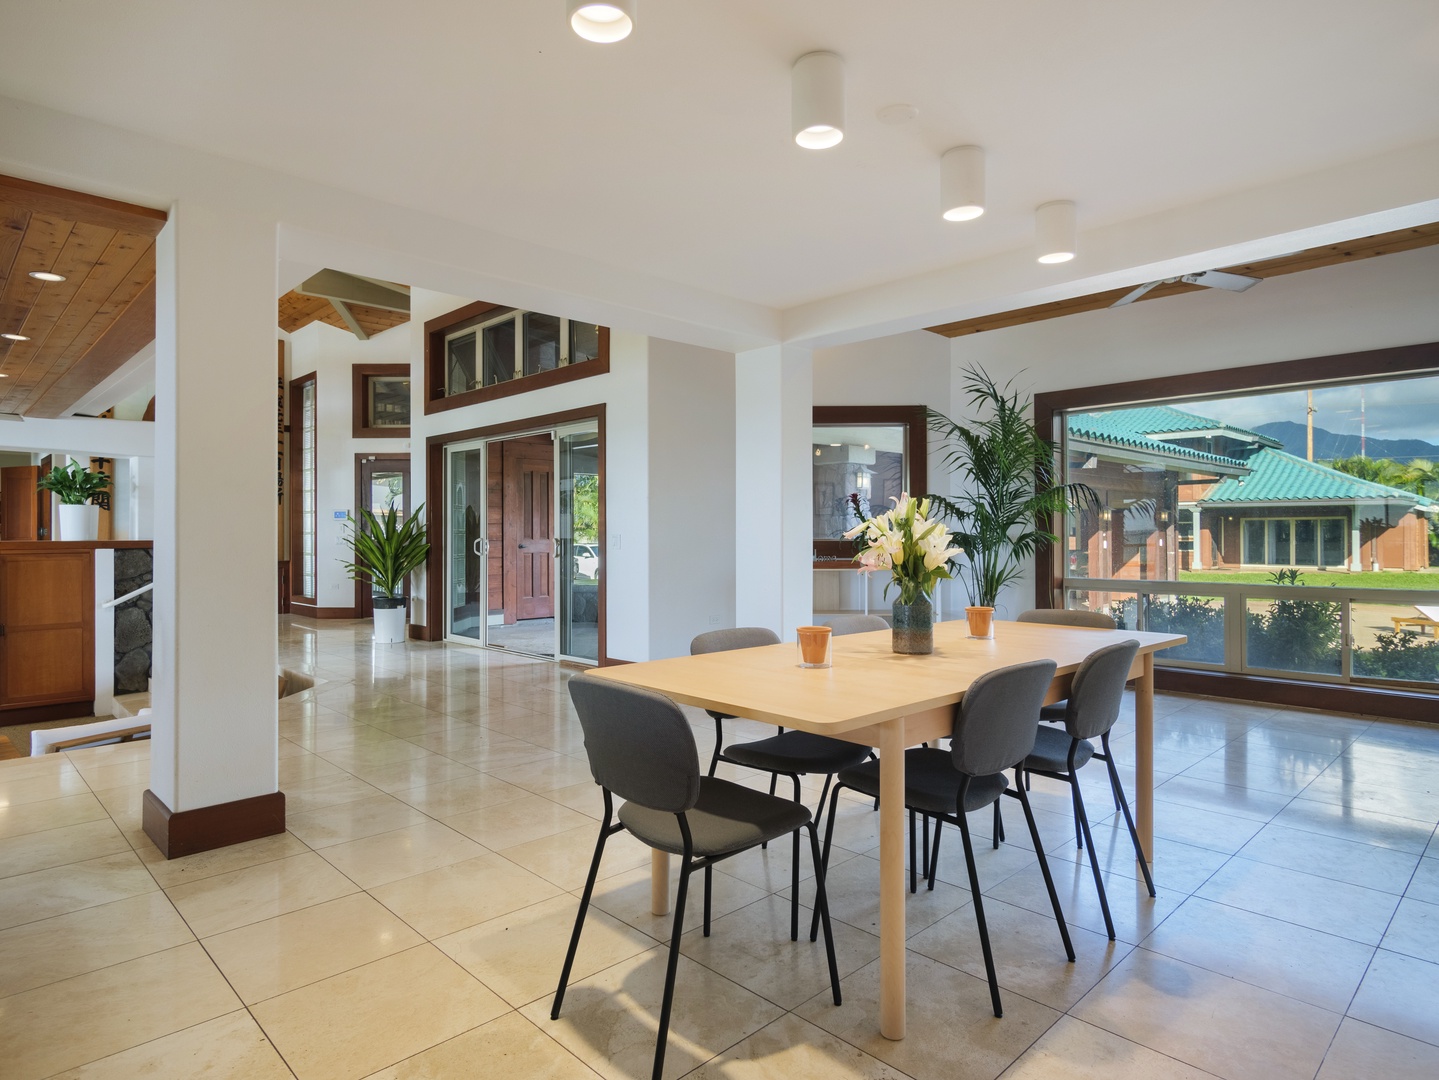 Waianae Vacation Rentals, Konishiki Beachhouse - Spacious dining area with table for six.